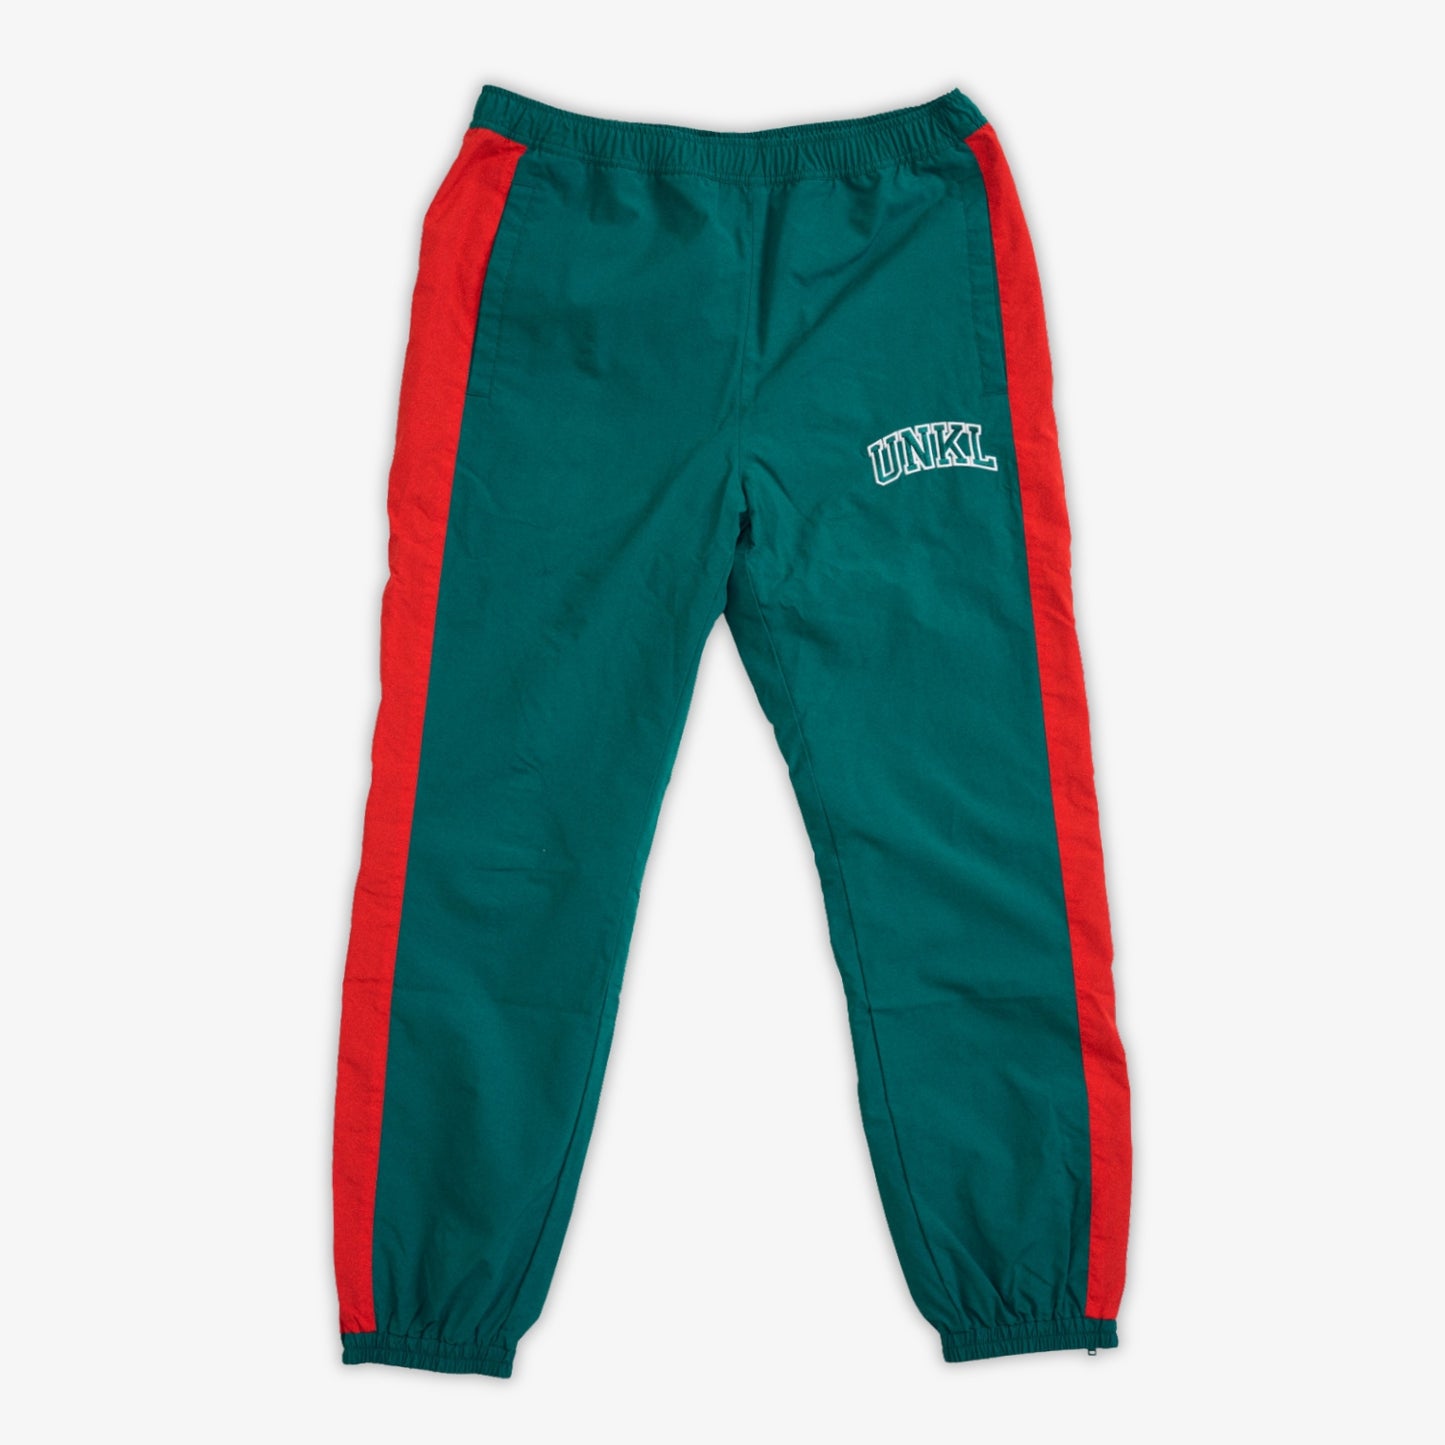 UNKL - Track Team Suit - Red / Green